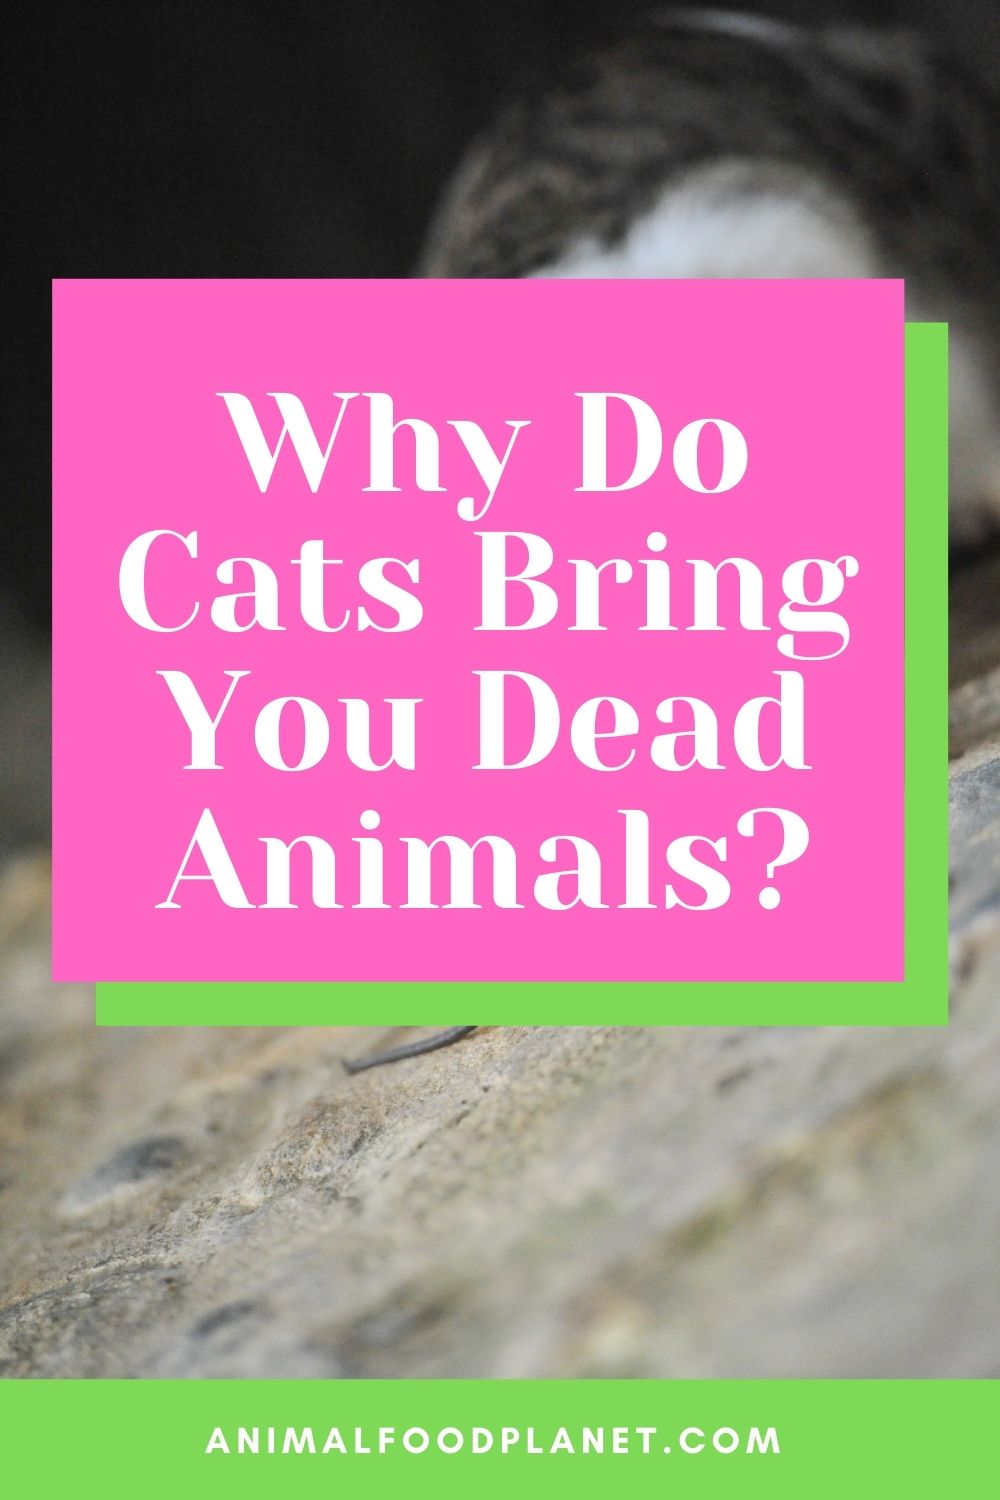 Why Do Cats Bring You Dead Animals